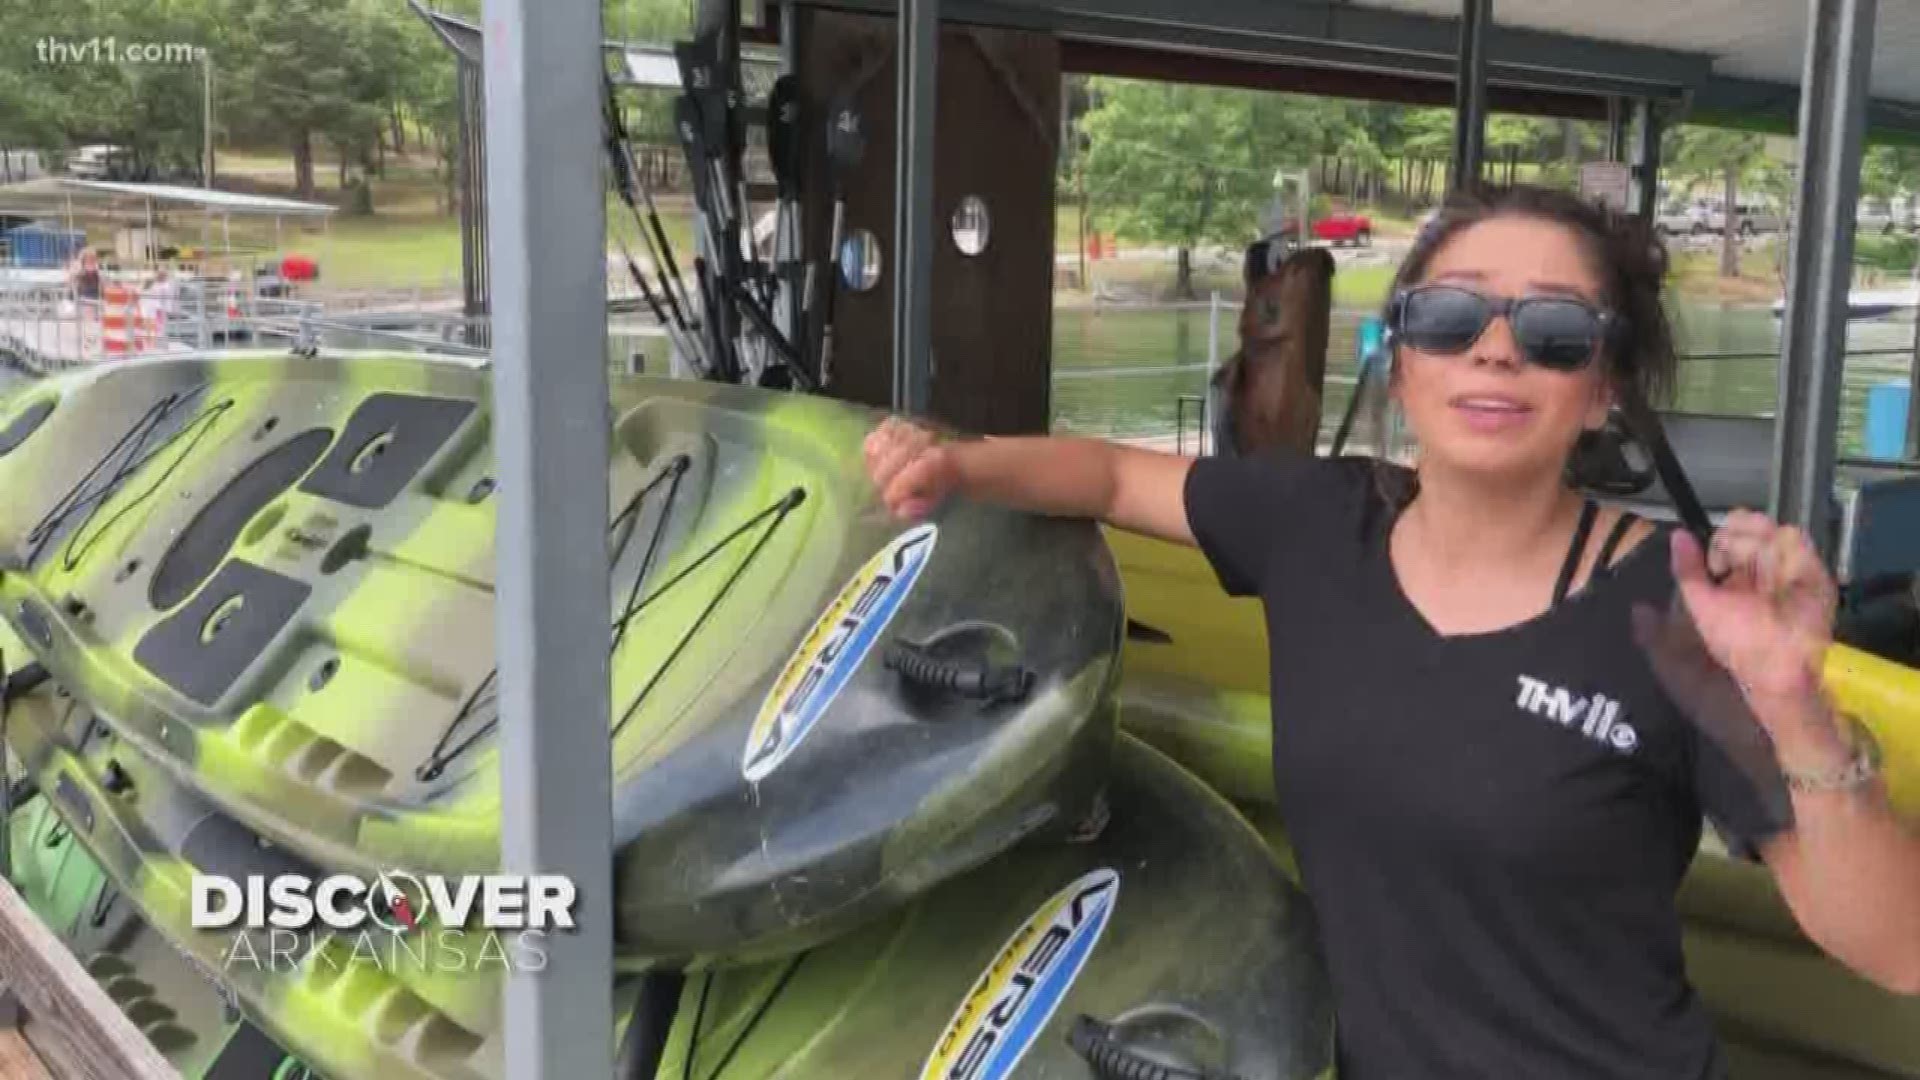 Another Wednesday means we're exploring another adventure in the Natural State. In this week's Discover Arkansas Adam Bledsoe and Mariel Ruiz headed to Fairfield Bay. This neat little town has some wonderful activities for the whole family.